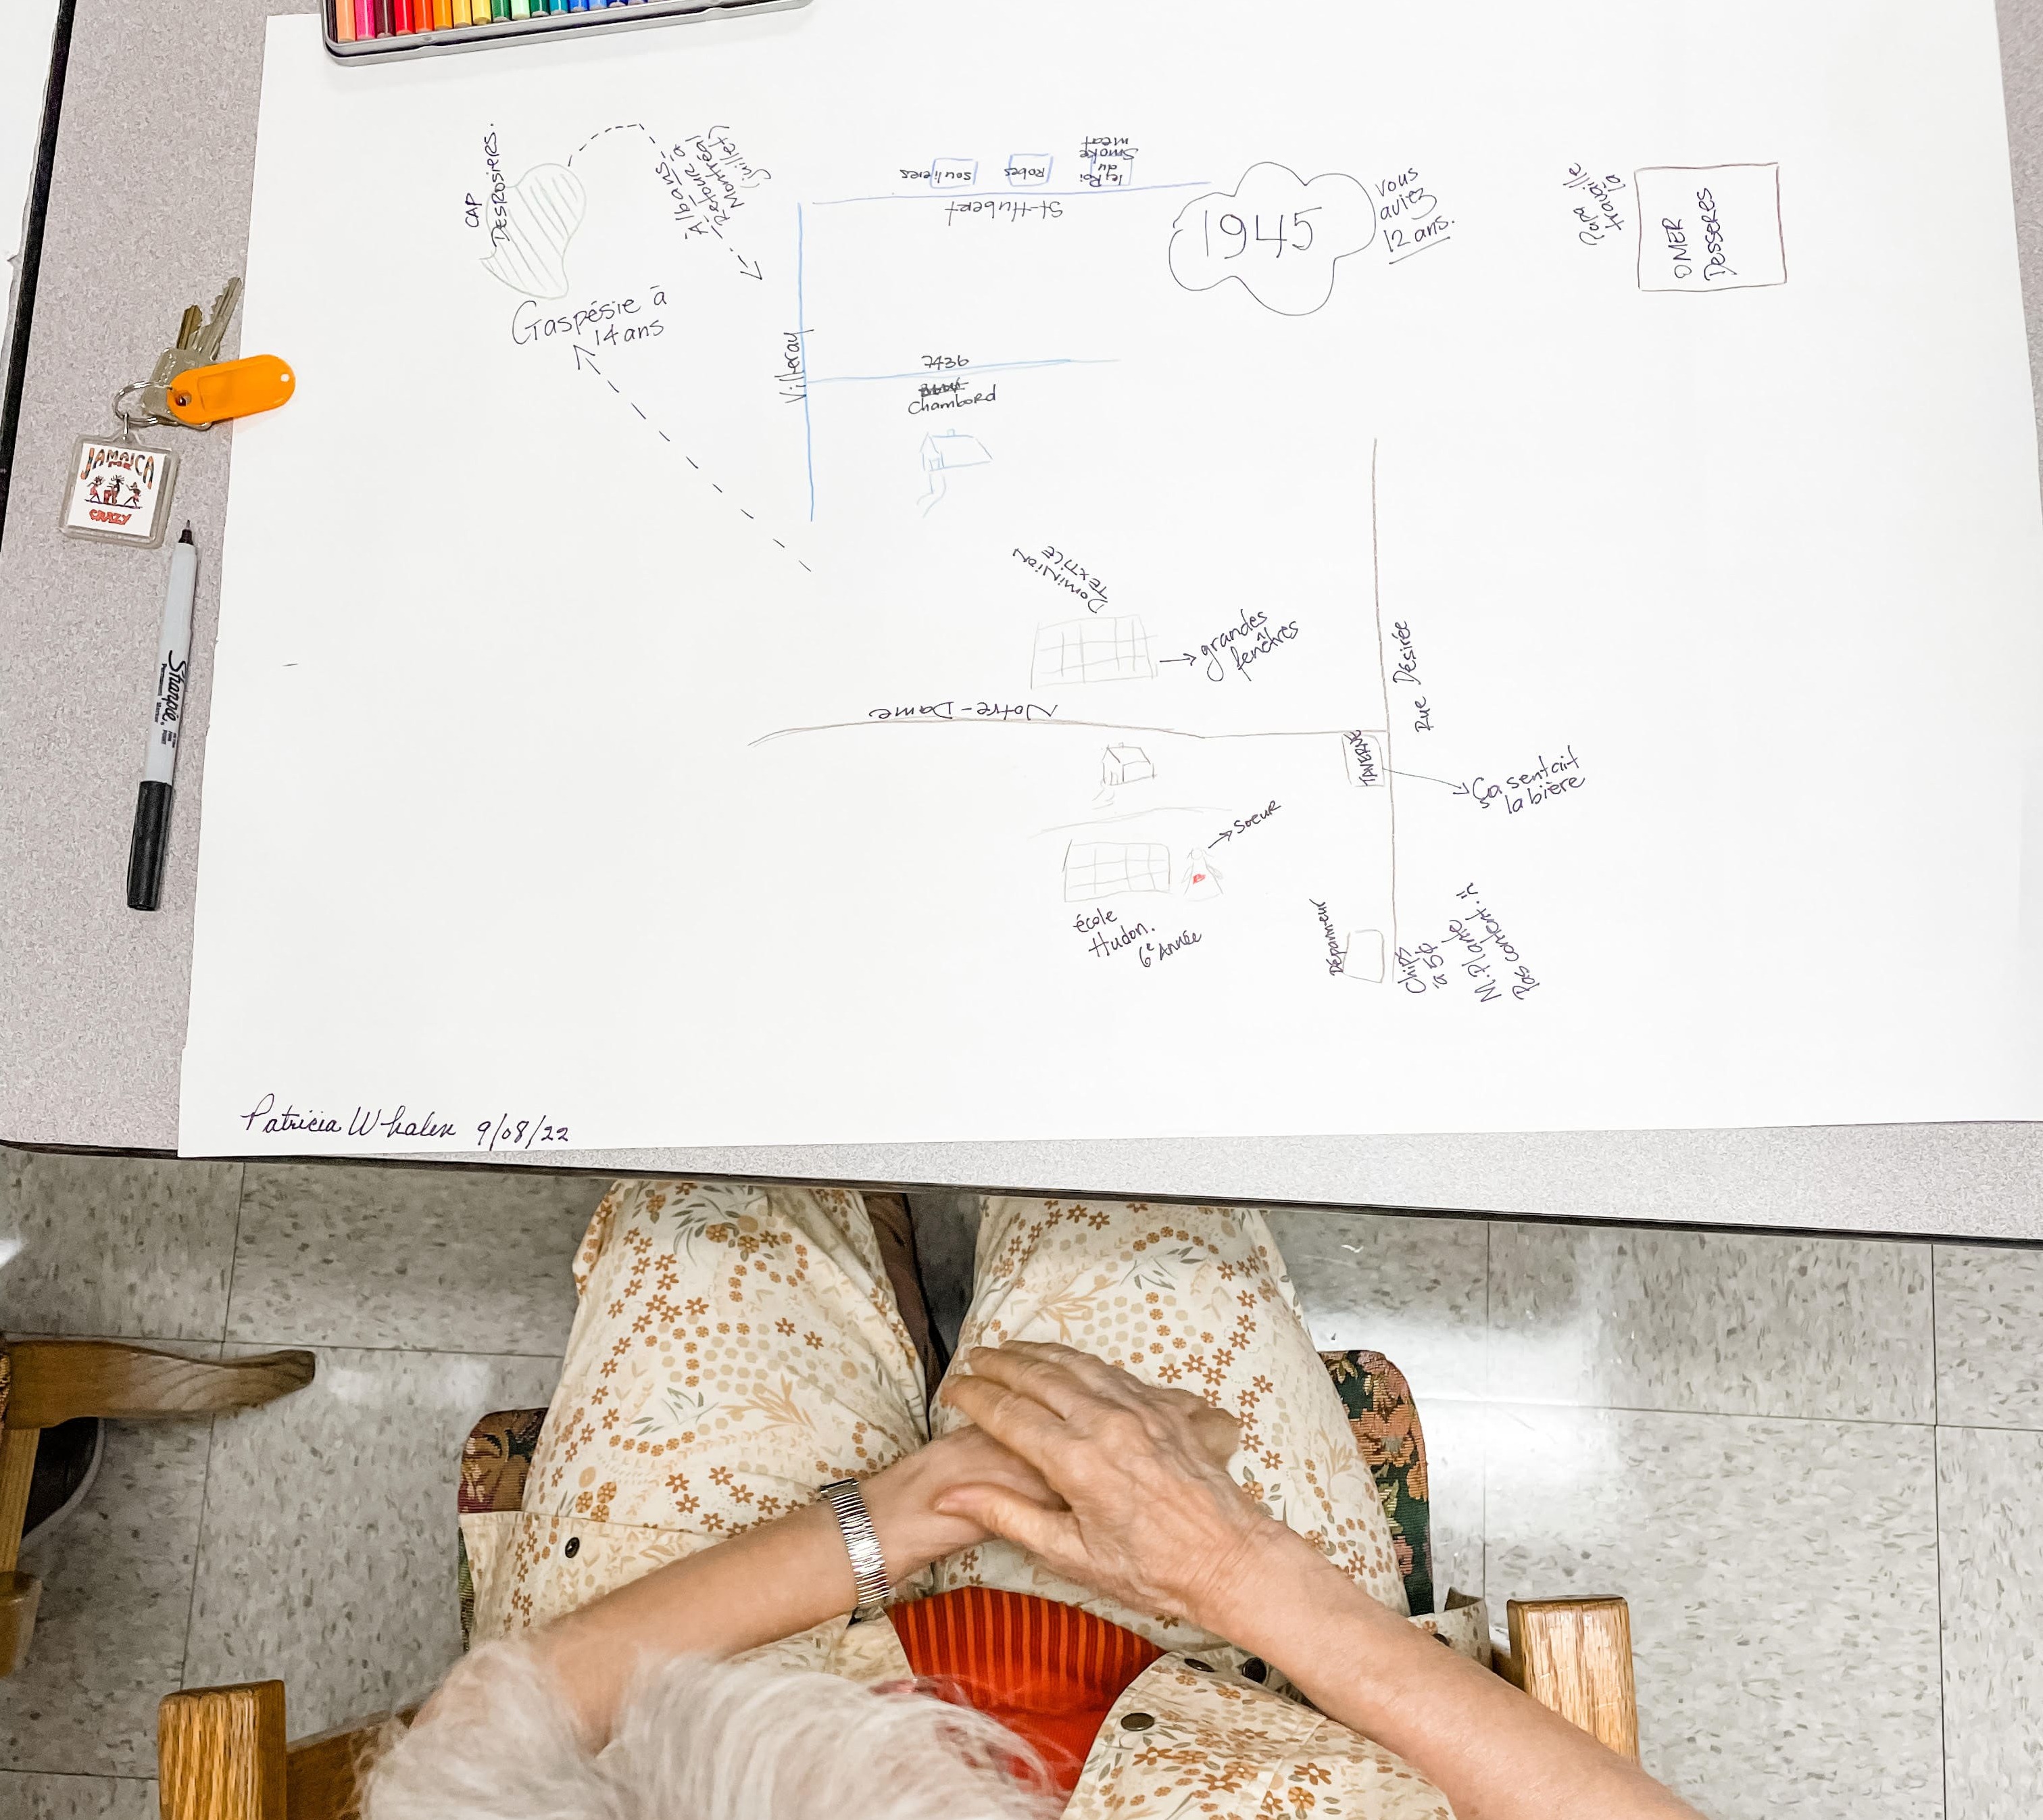 Elderly woman sitting in front of a board with descriptive and temporal references of her life.